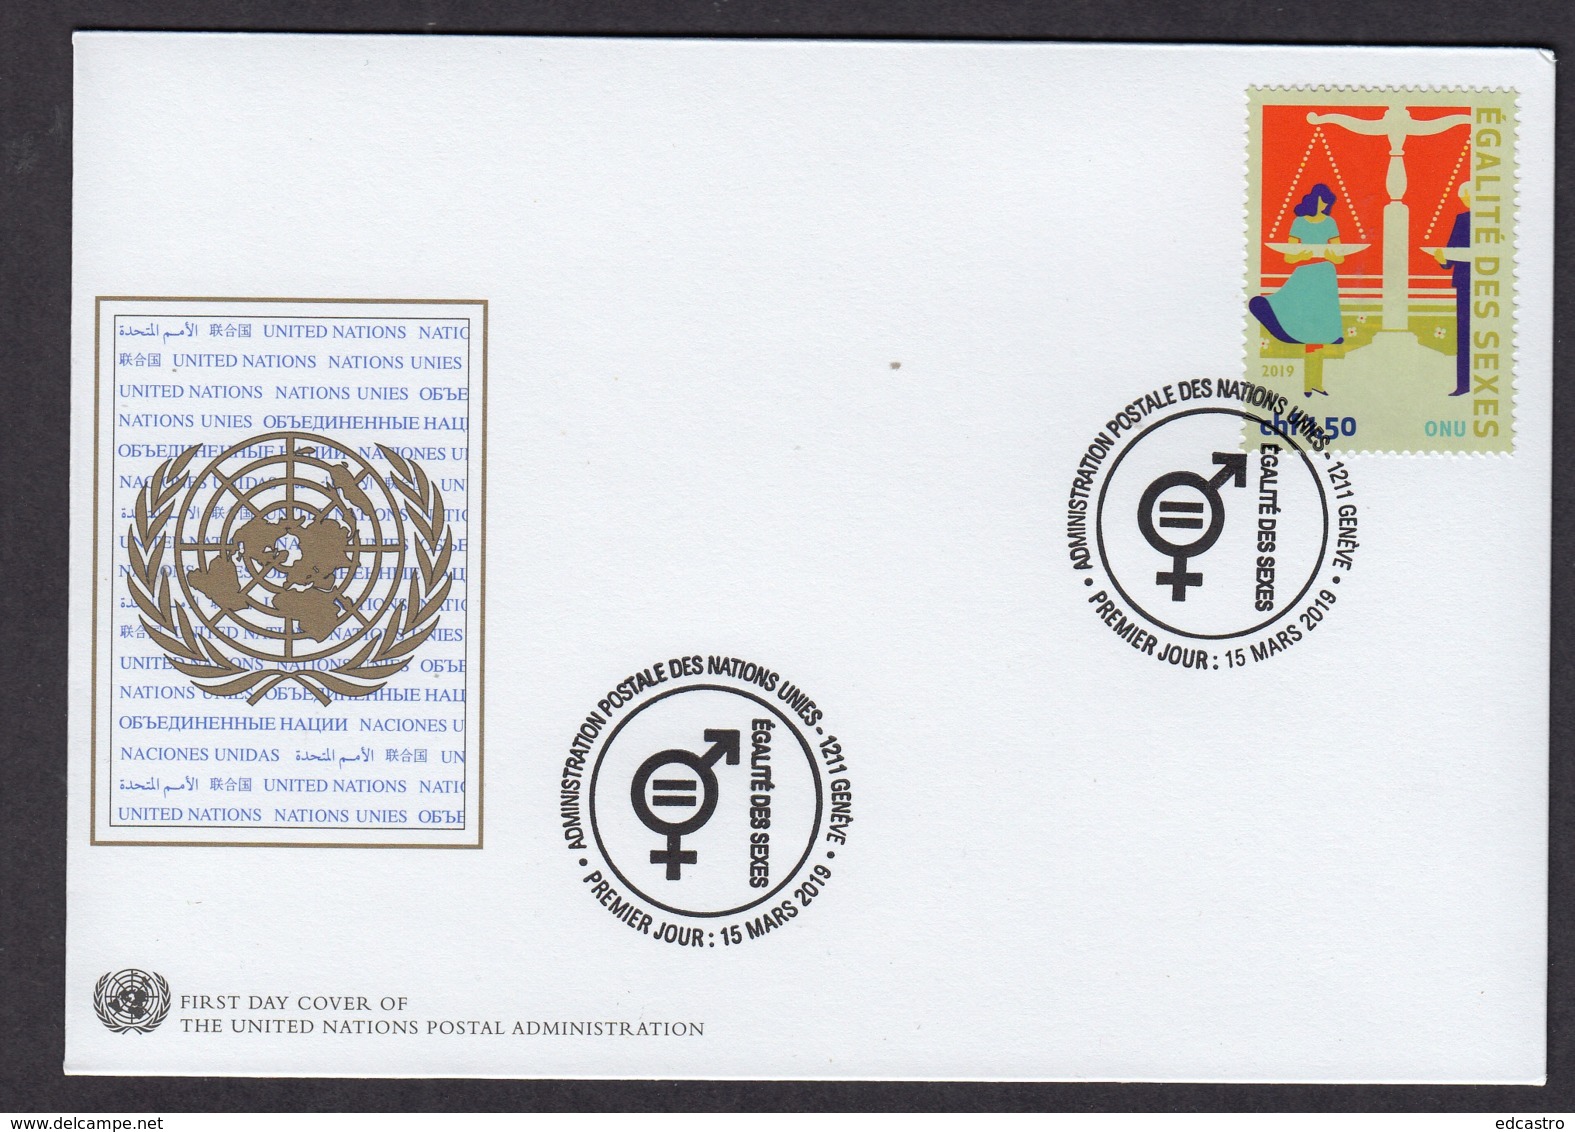 1.- UNITED NATIONS 2019 GENEVA OFFICE - FDC - Gender Equality - FDC